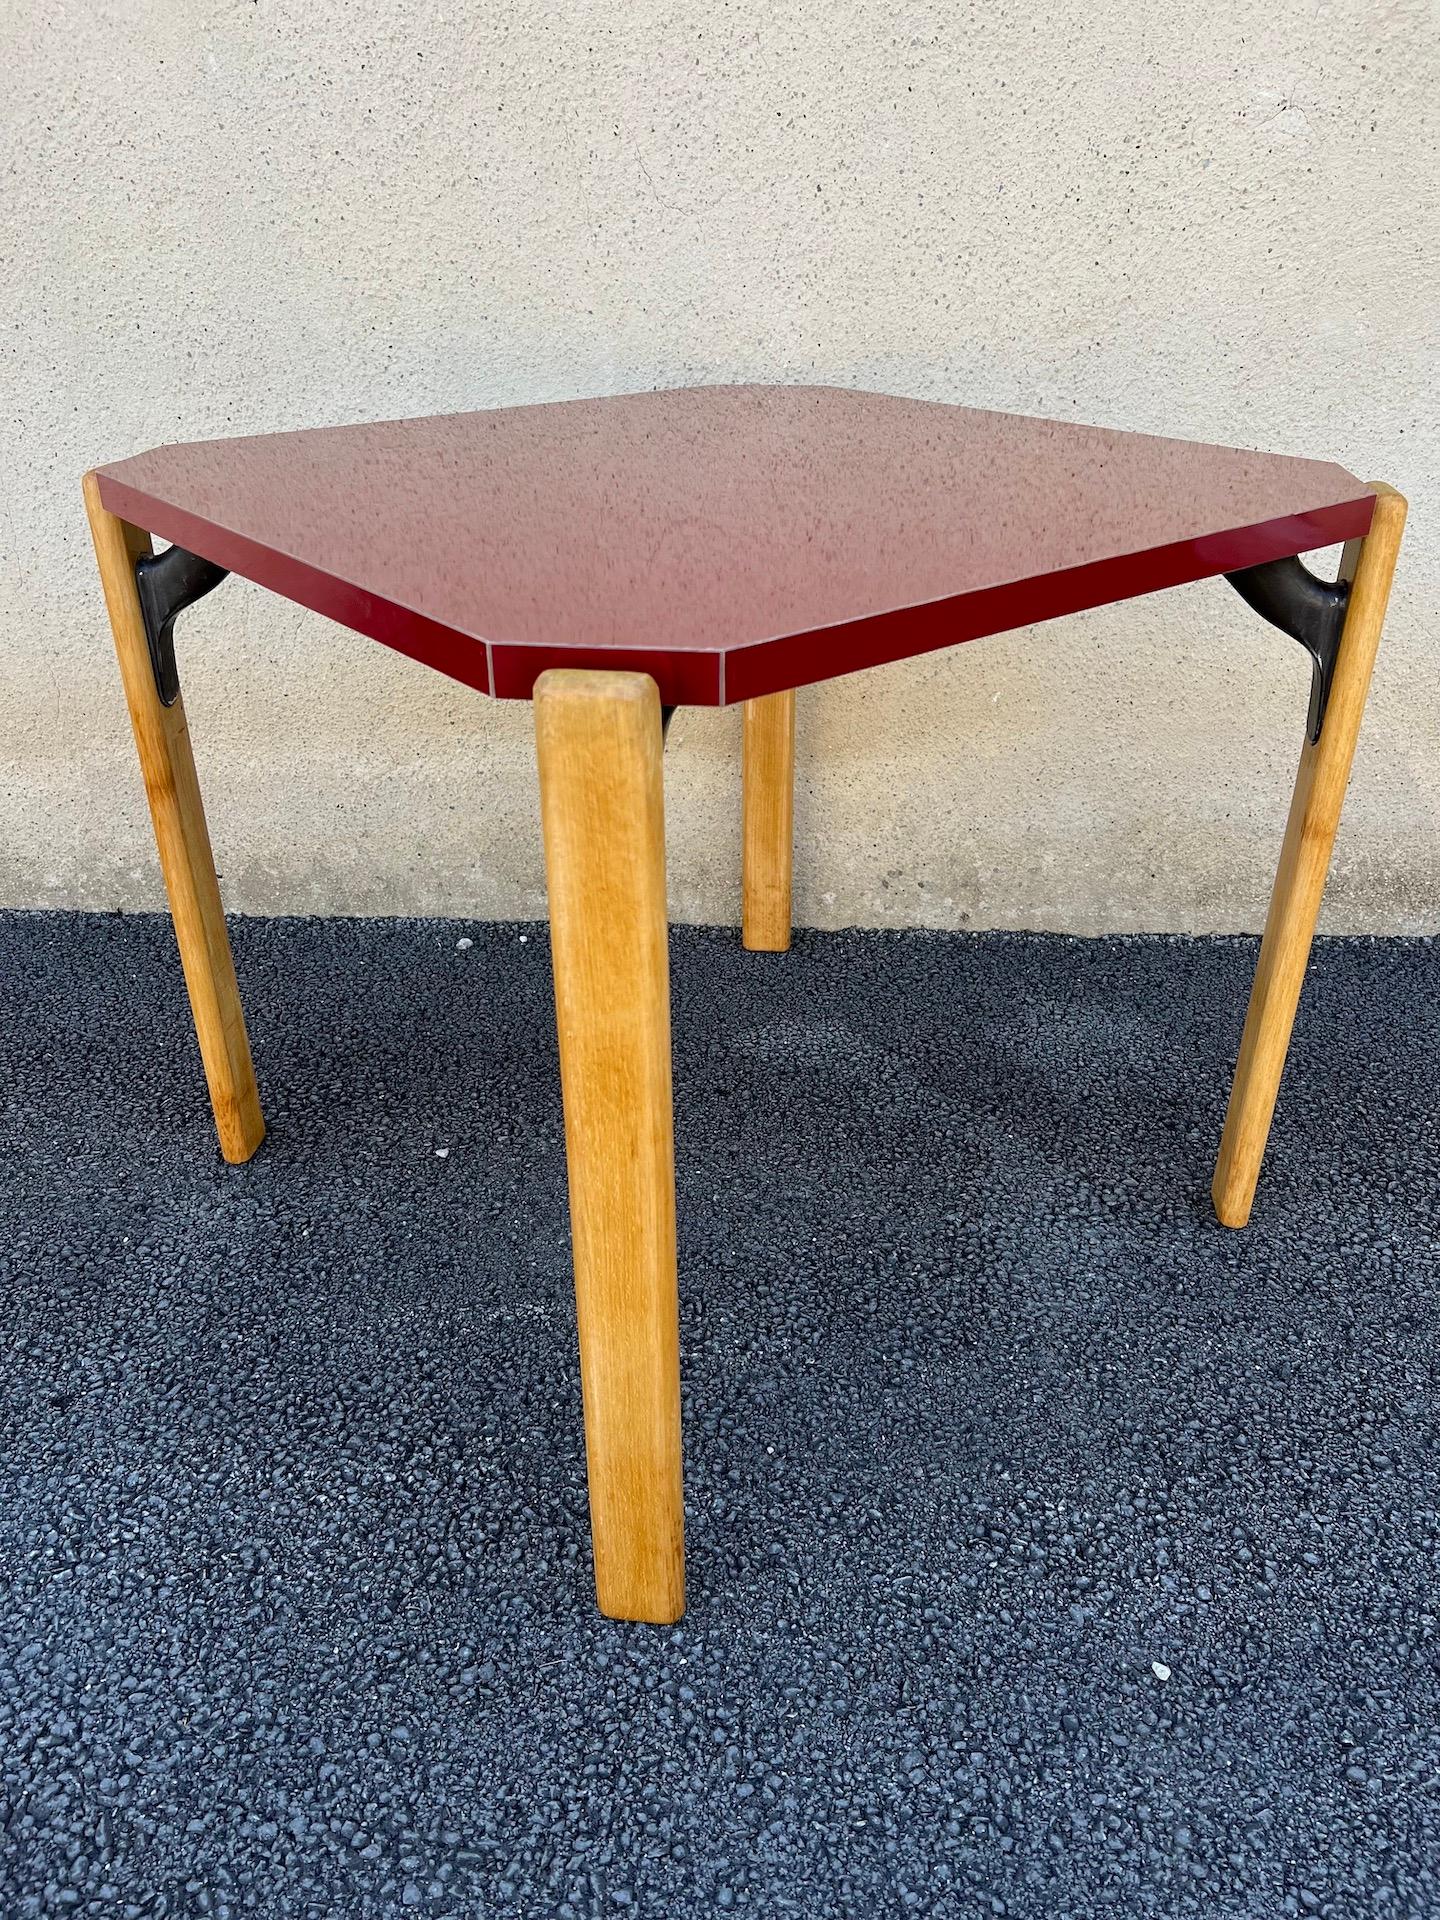 Bruno Rey table in red formica for Dietiker, 1970s.
The table has been completely restored, the base sanded and the top covered with a red Formica. Ideal for kitchen.
 